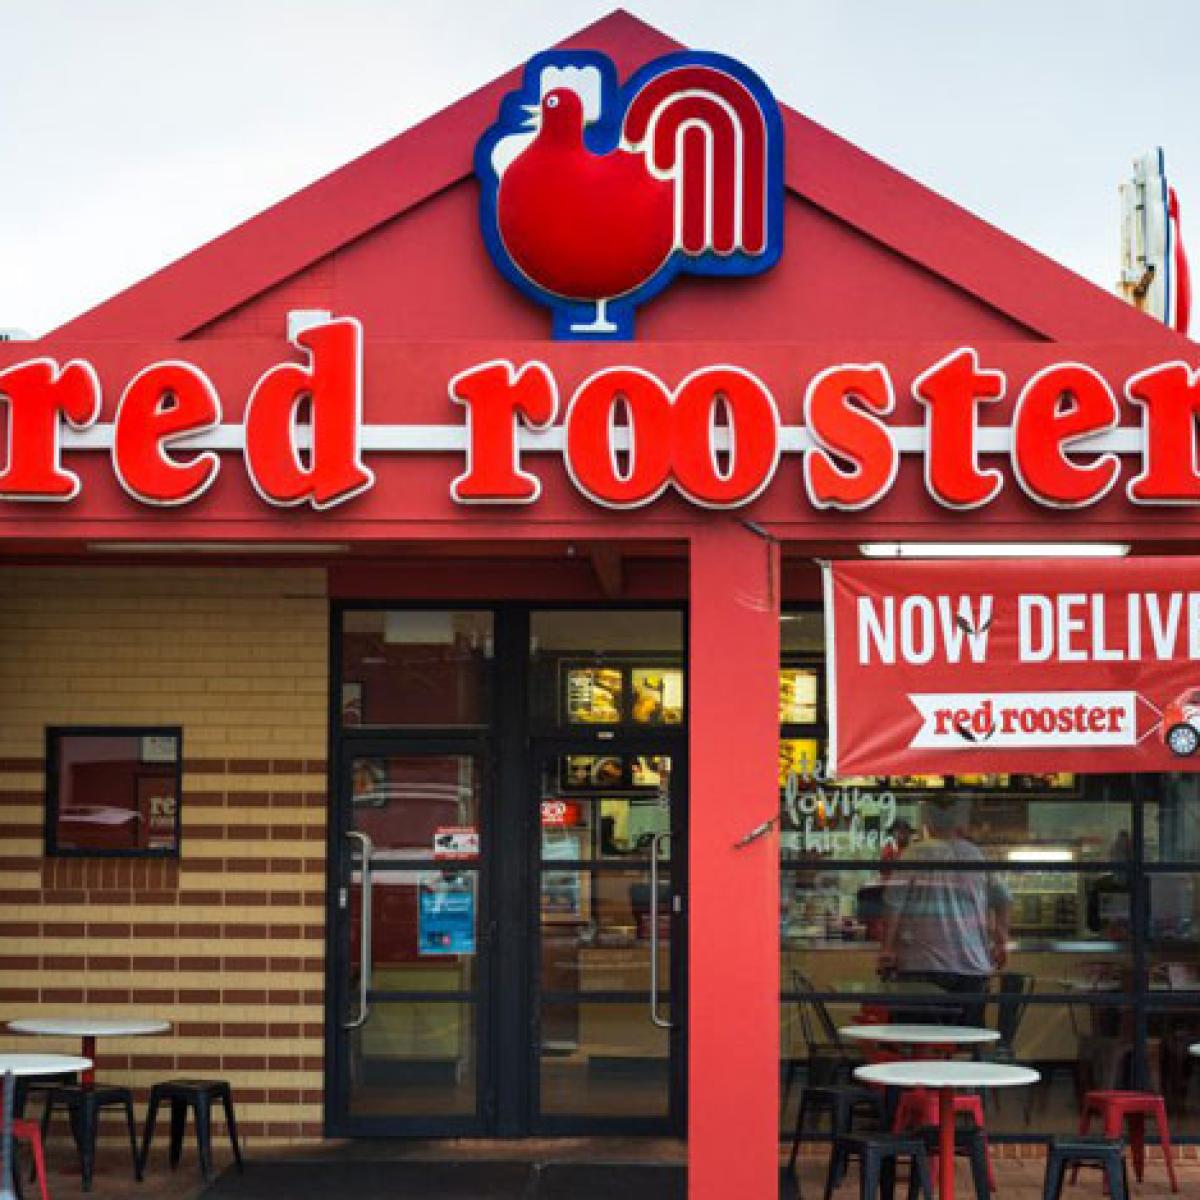 Red Rooster's Helping Those By The Floods